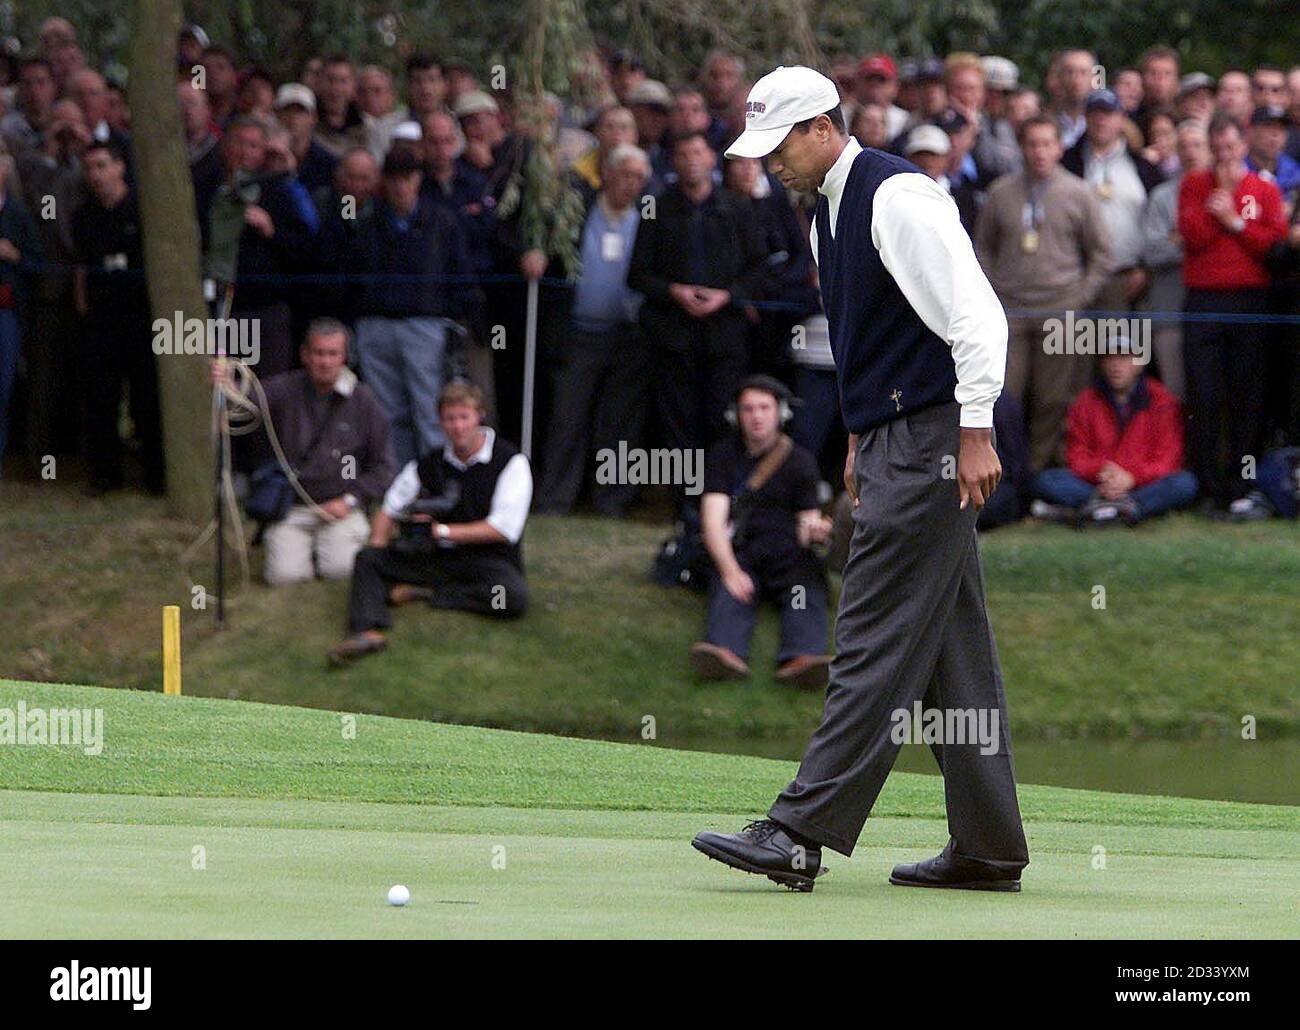 America's Tiger Woods looks incredulously at his ball after missing a short putt on the 12th green. Woods was partnering Mark Calcavecchia against Europe's Lee Westwood and Sergio Garcia on first day of competition in Ryder Cup at the Belfry, near Sutton Coldfield. Stock Photo